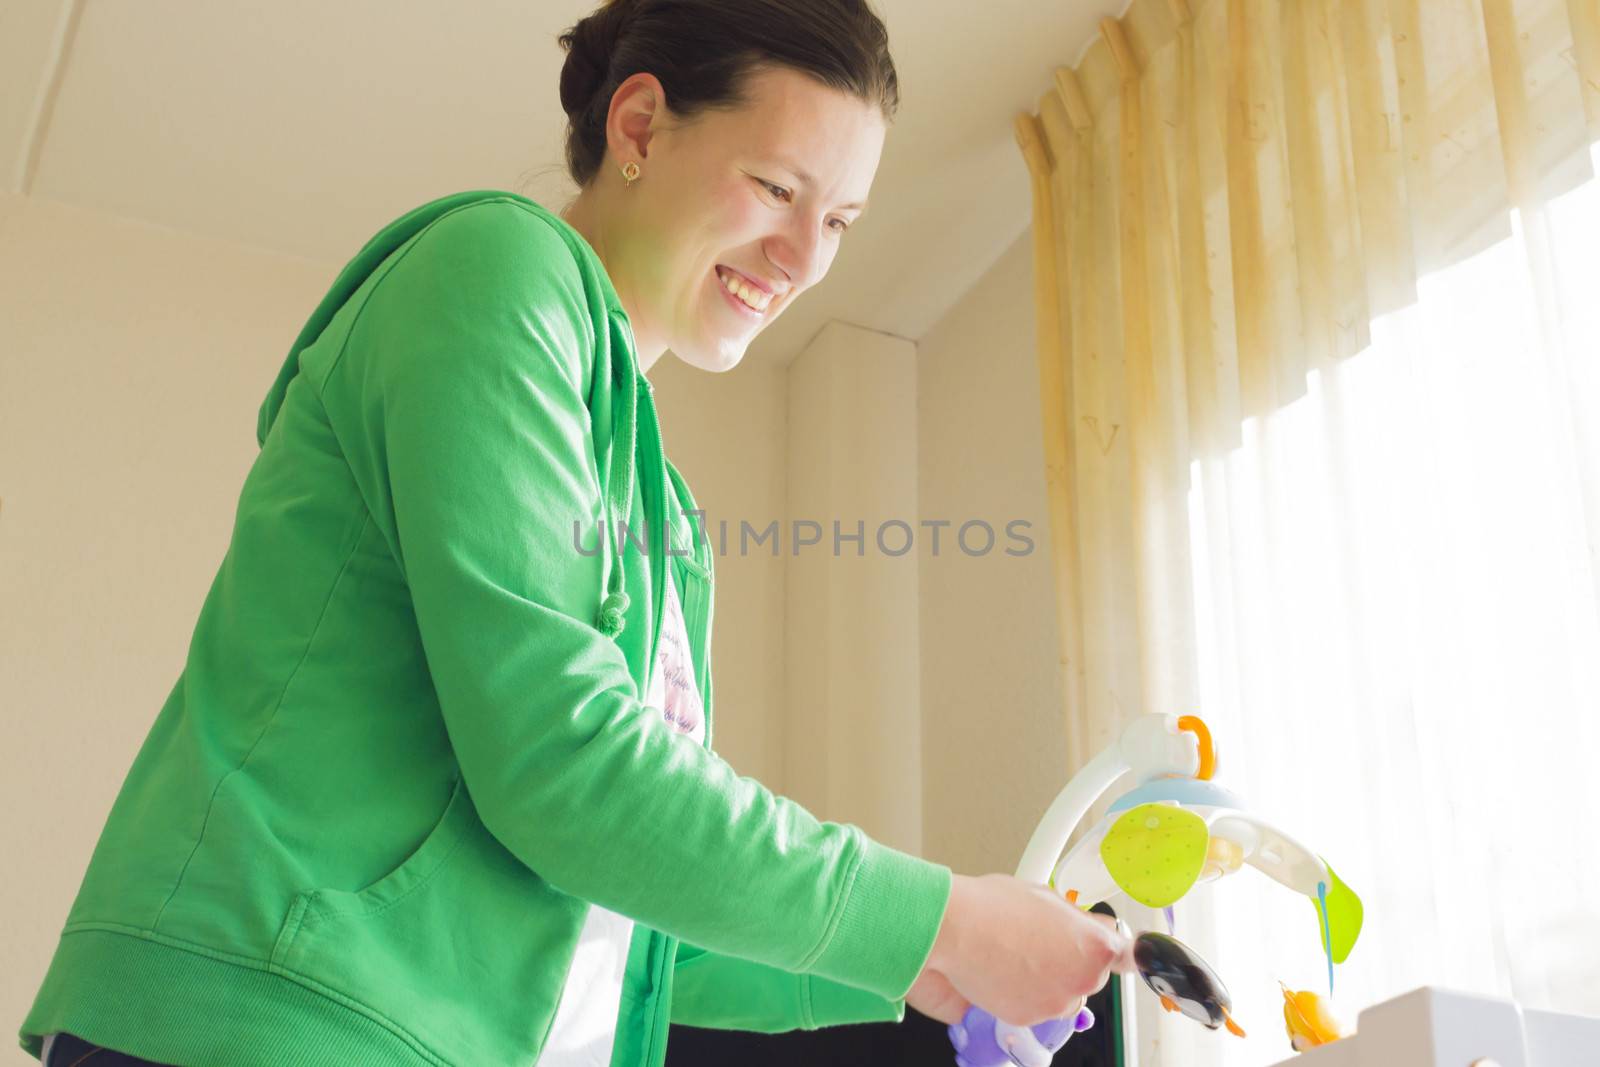 mother runs a music windup toy over the baby's crib by Tetyana